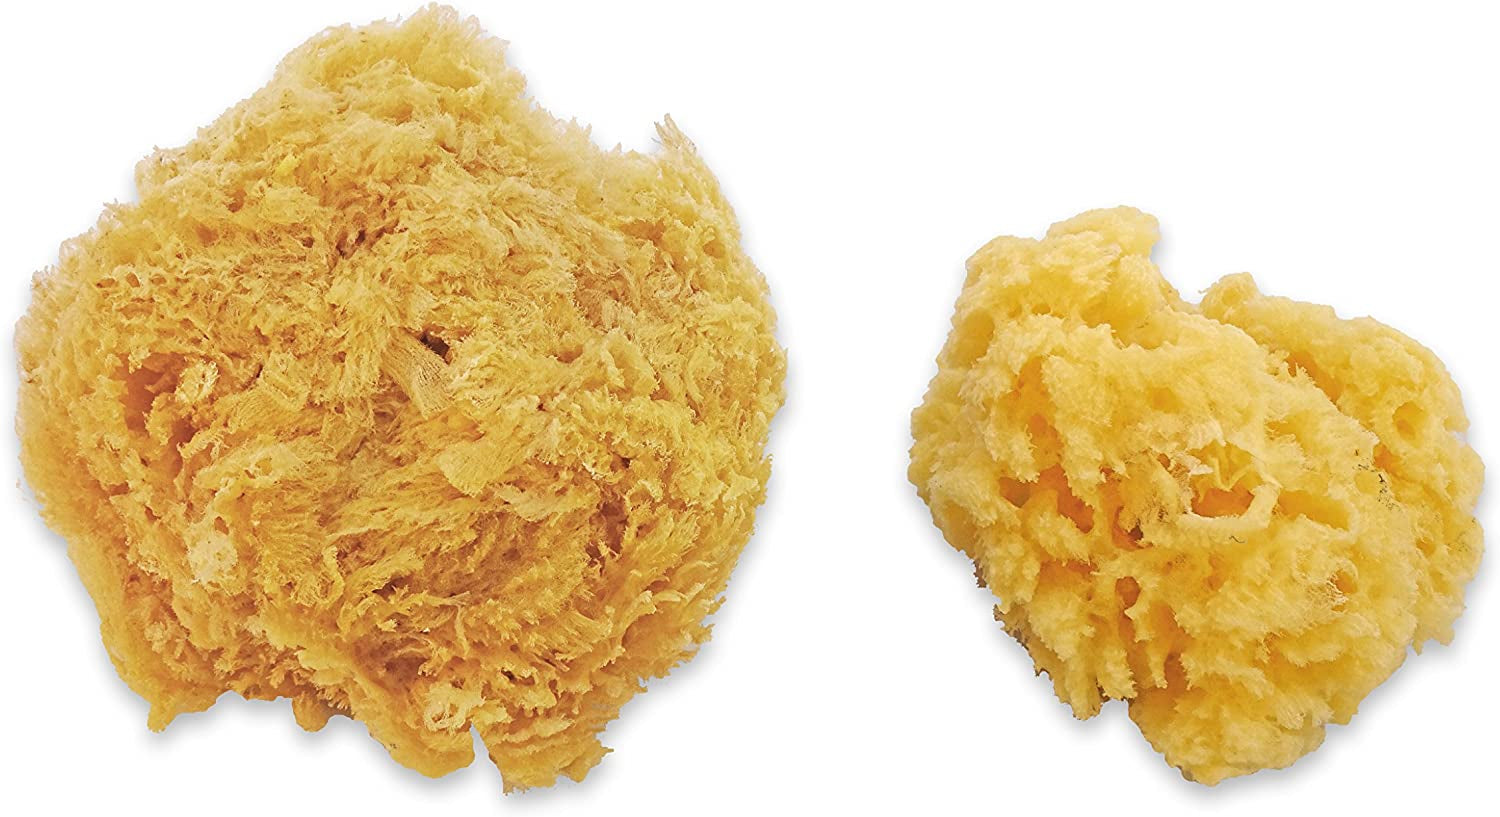 Half Natural Sea Sponge for Painting, Decorating, Texturing, Sponging,  Marbling